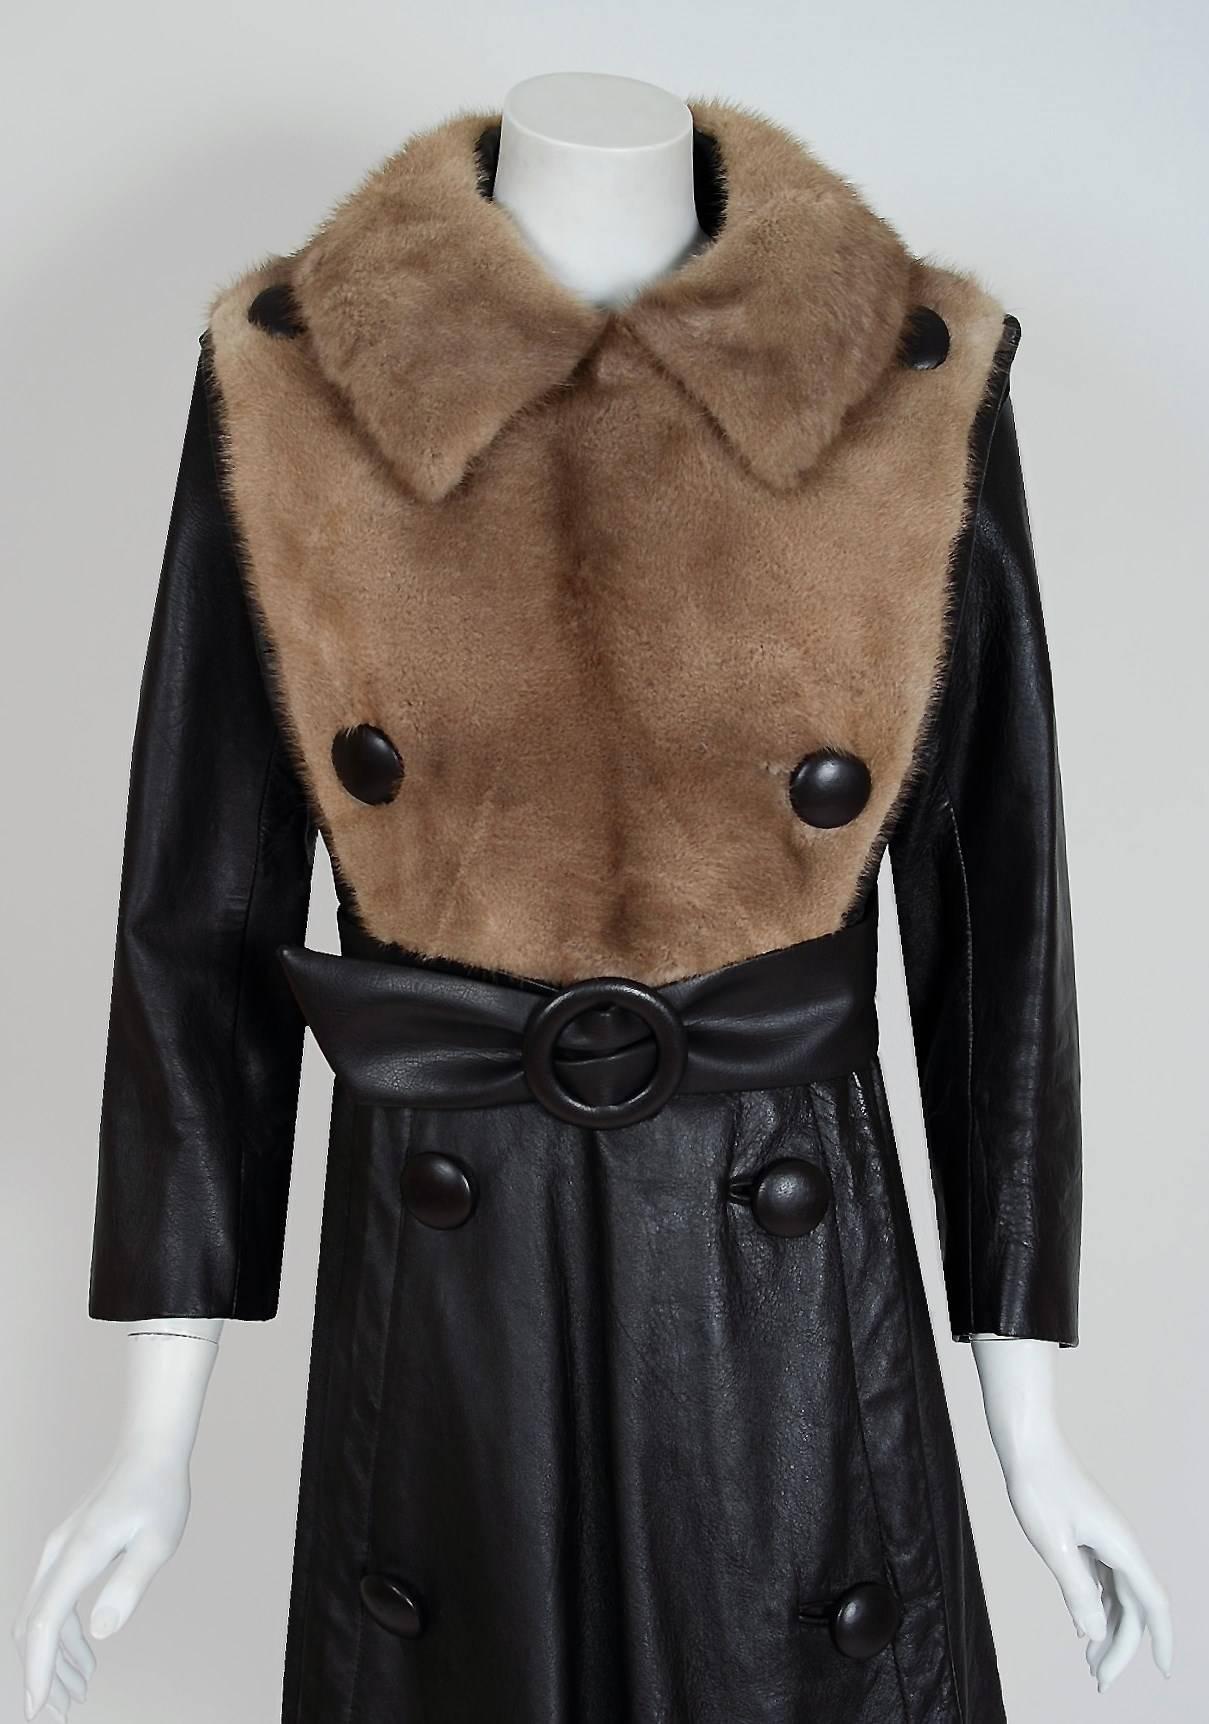 A stunning 1960's tailored coat in the most fabulous genuine mink-fur and leather combination! The beautiful dark chocolate-brown color is perfect for the upcoming season. I love the military inspired double-breasted design and oversized collar.